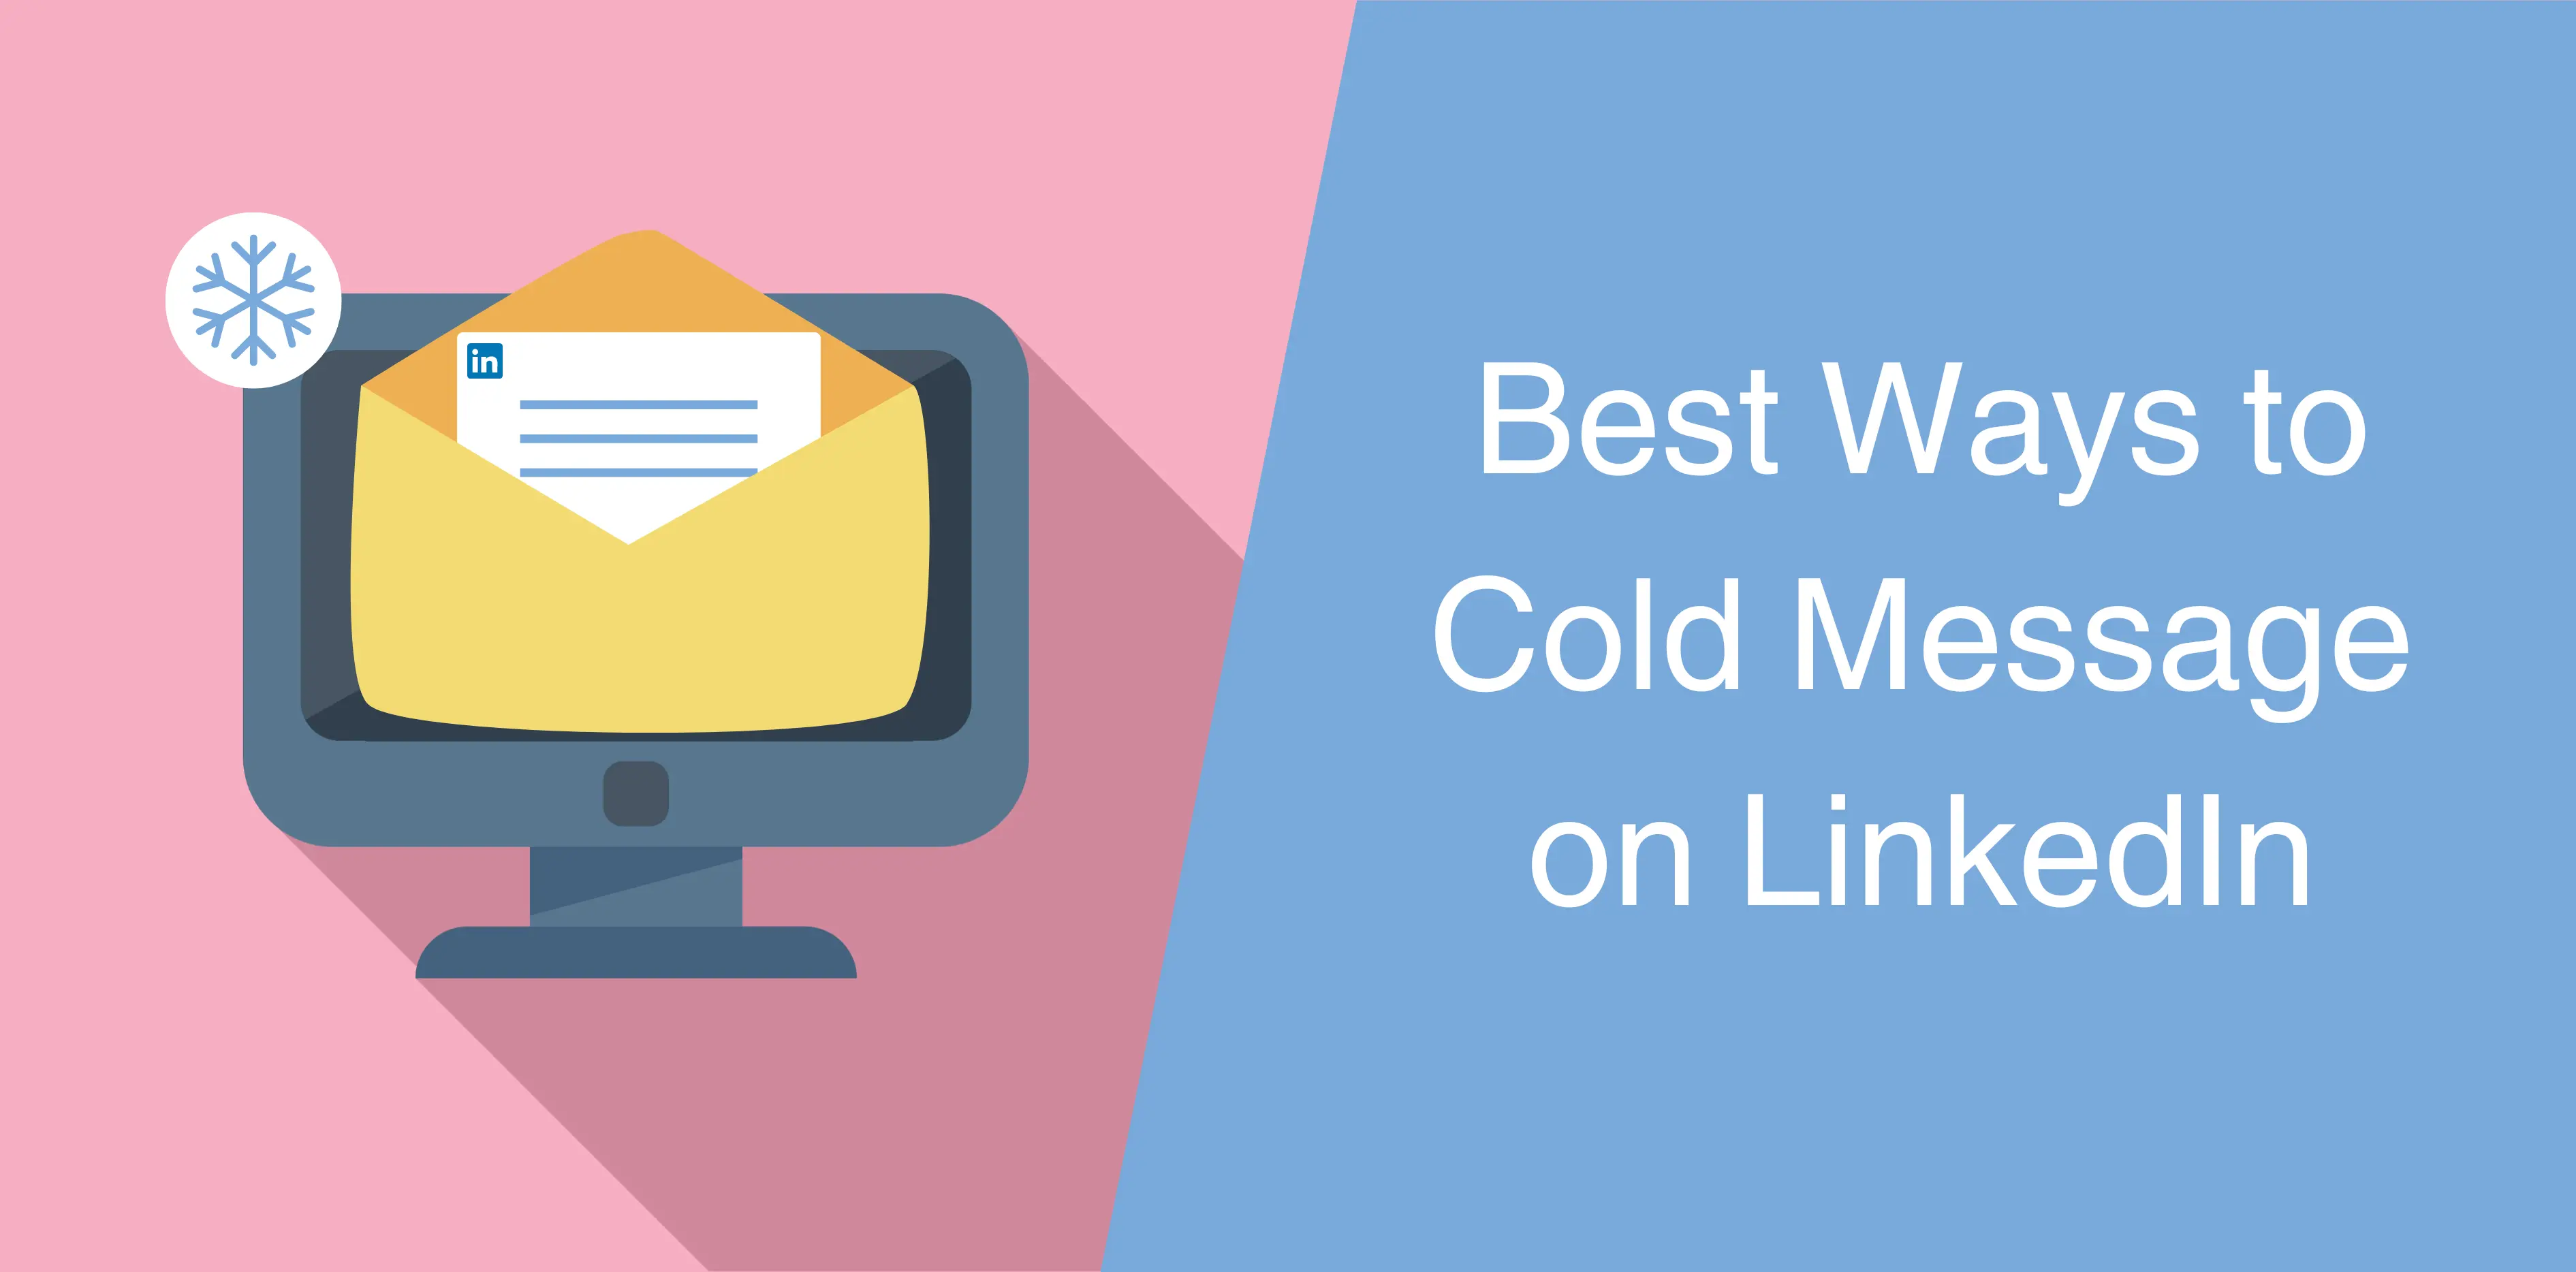 Best Ways to Cold Message on LinkedIn